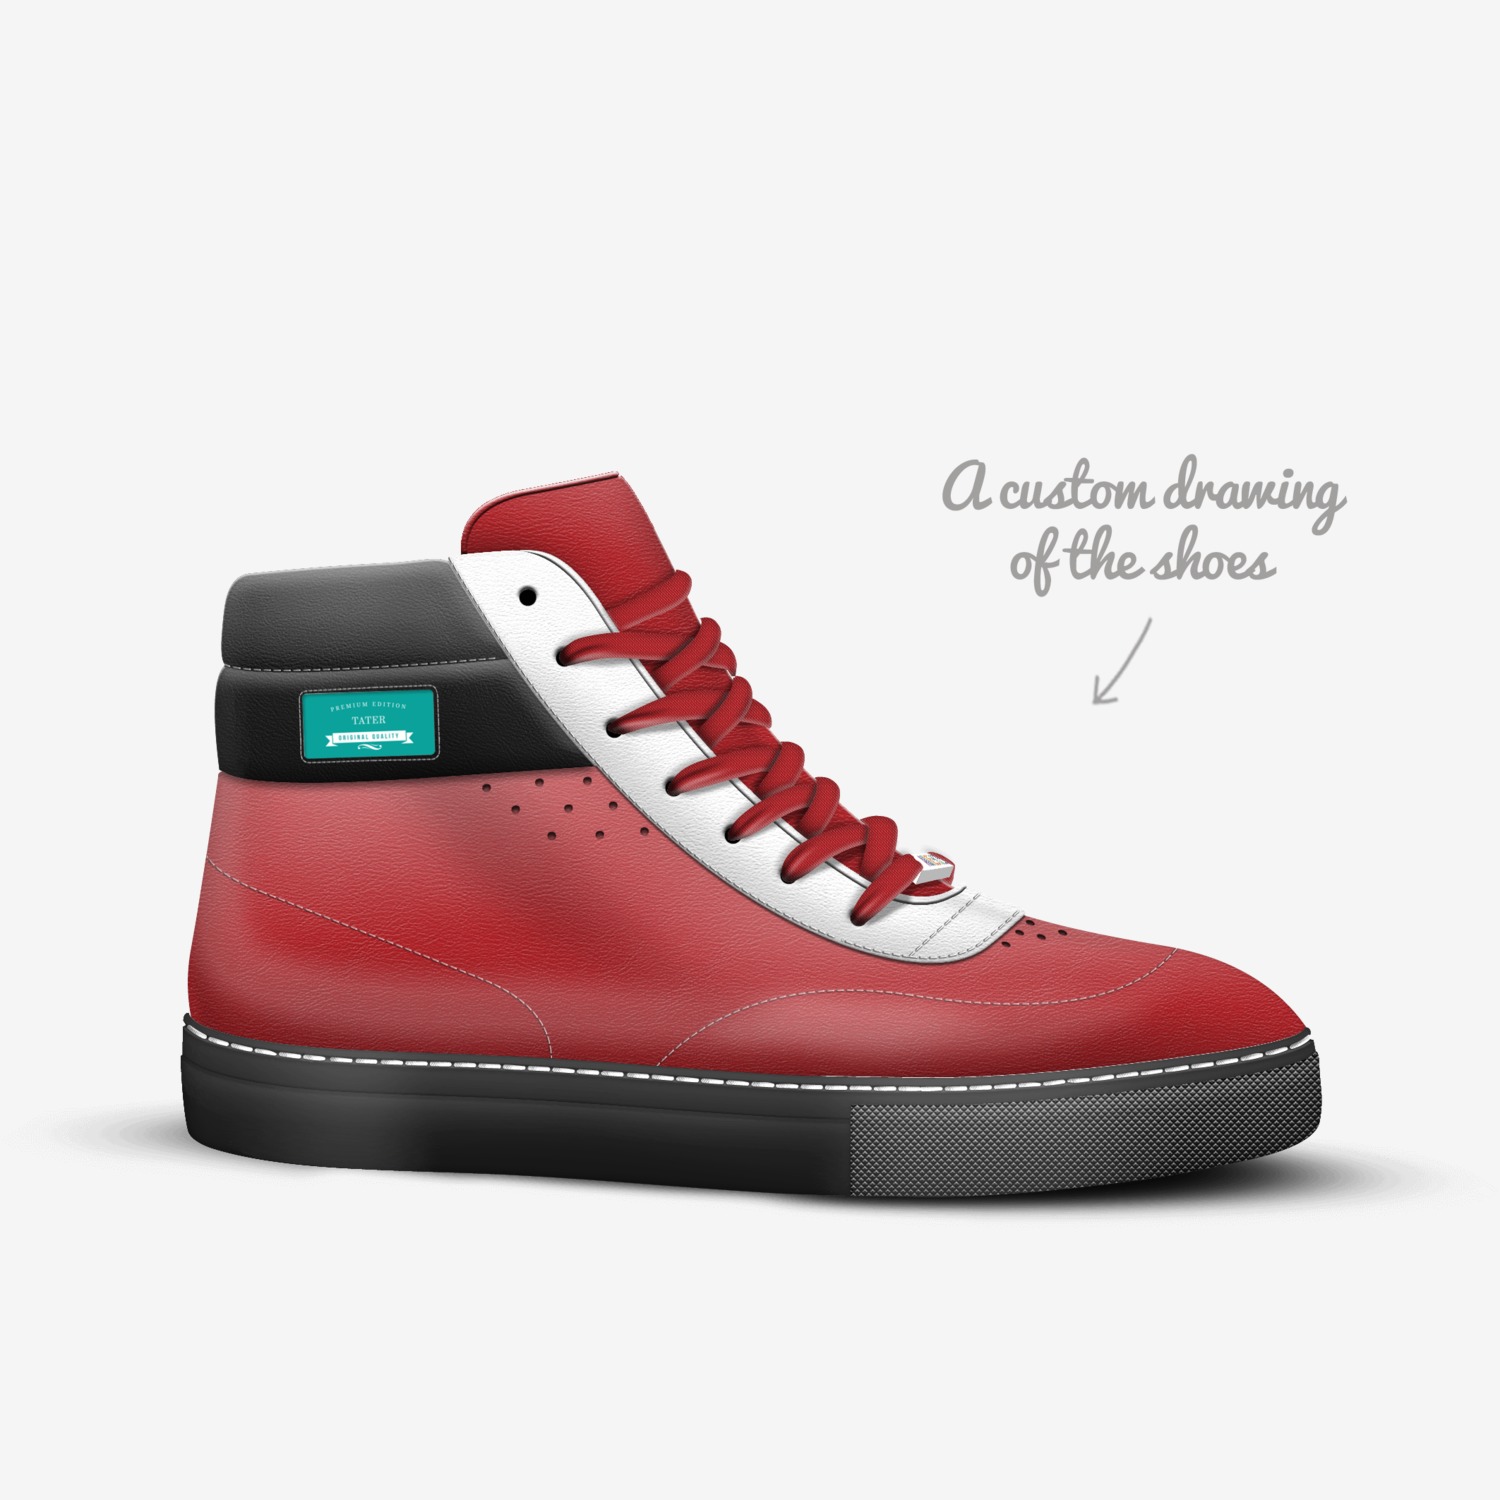 Tater | A Custom Shoe concept by Timothy